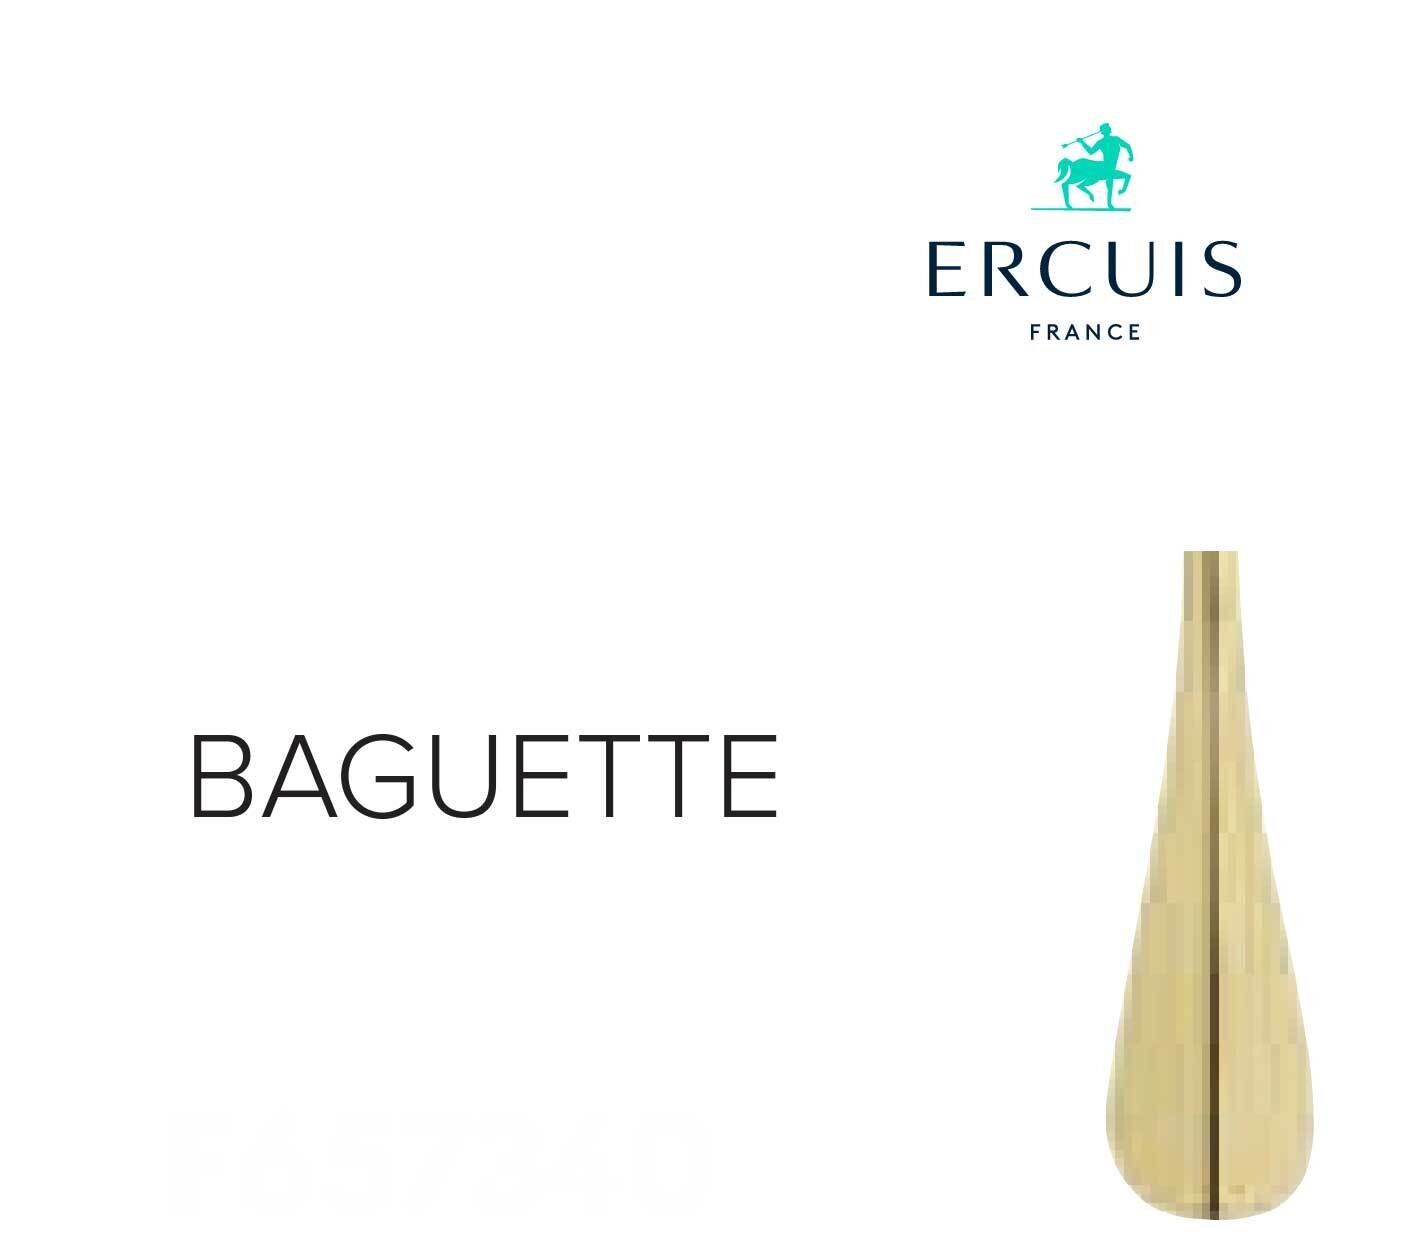 Ercuis Baguette Ice Cream Serving Ladle Gold Plated F657340-49